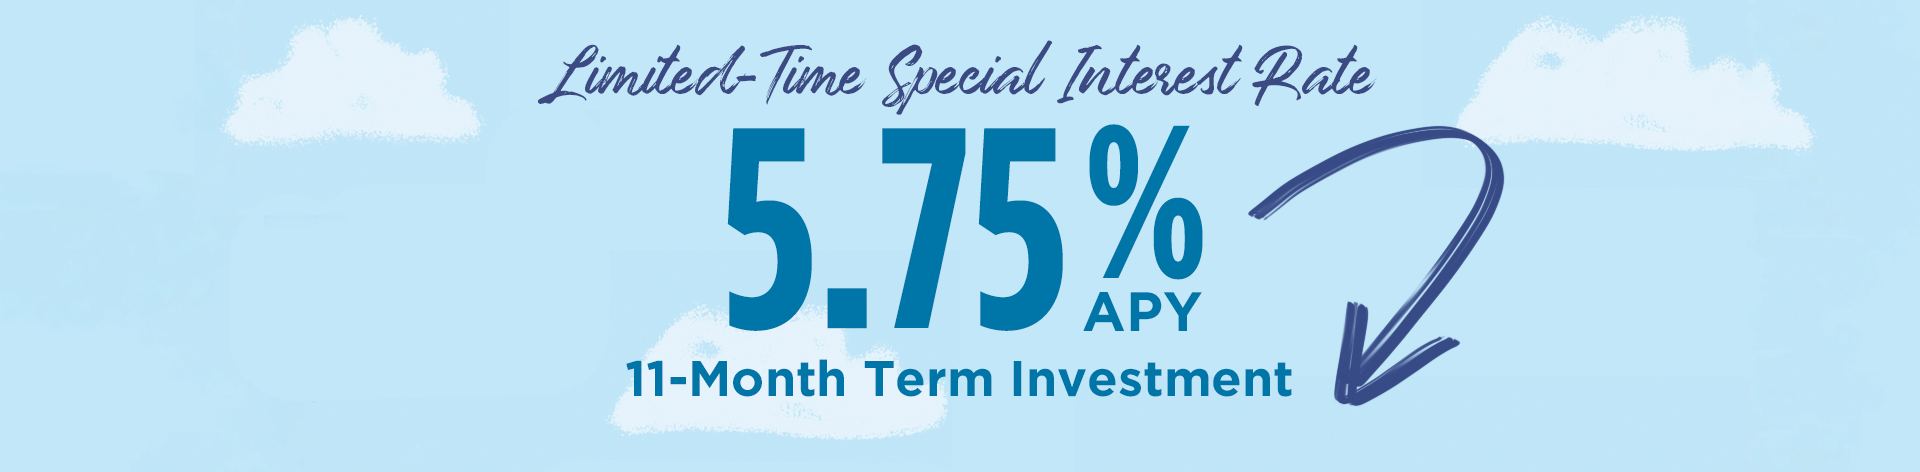 Limited-Time Special Interest Rate: 5.75% APY 11-Month Term Investment